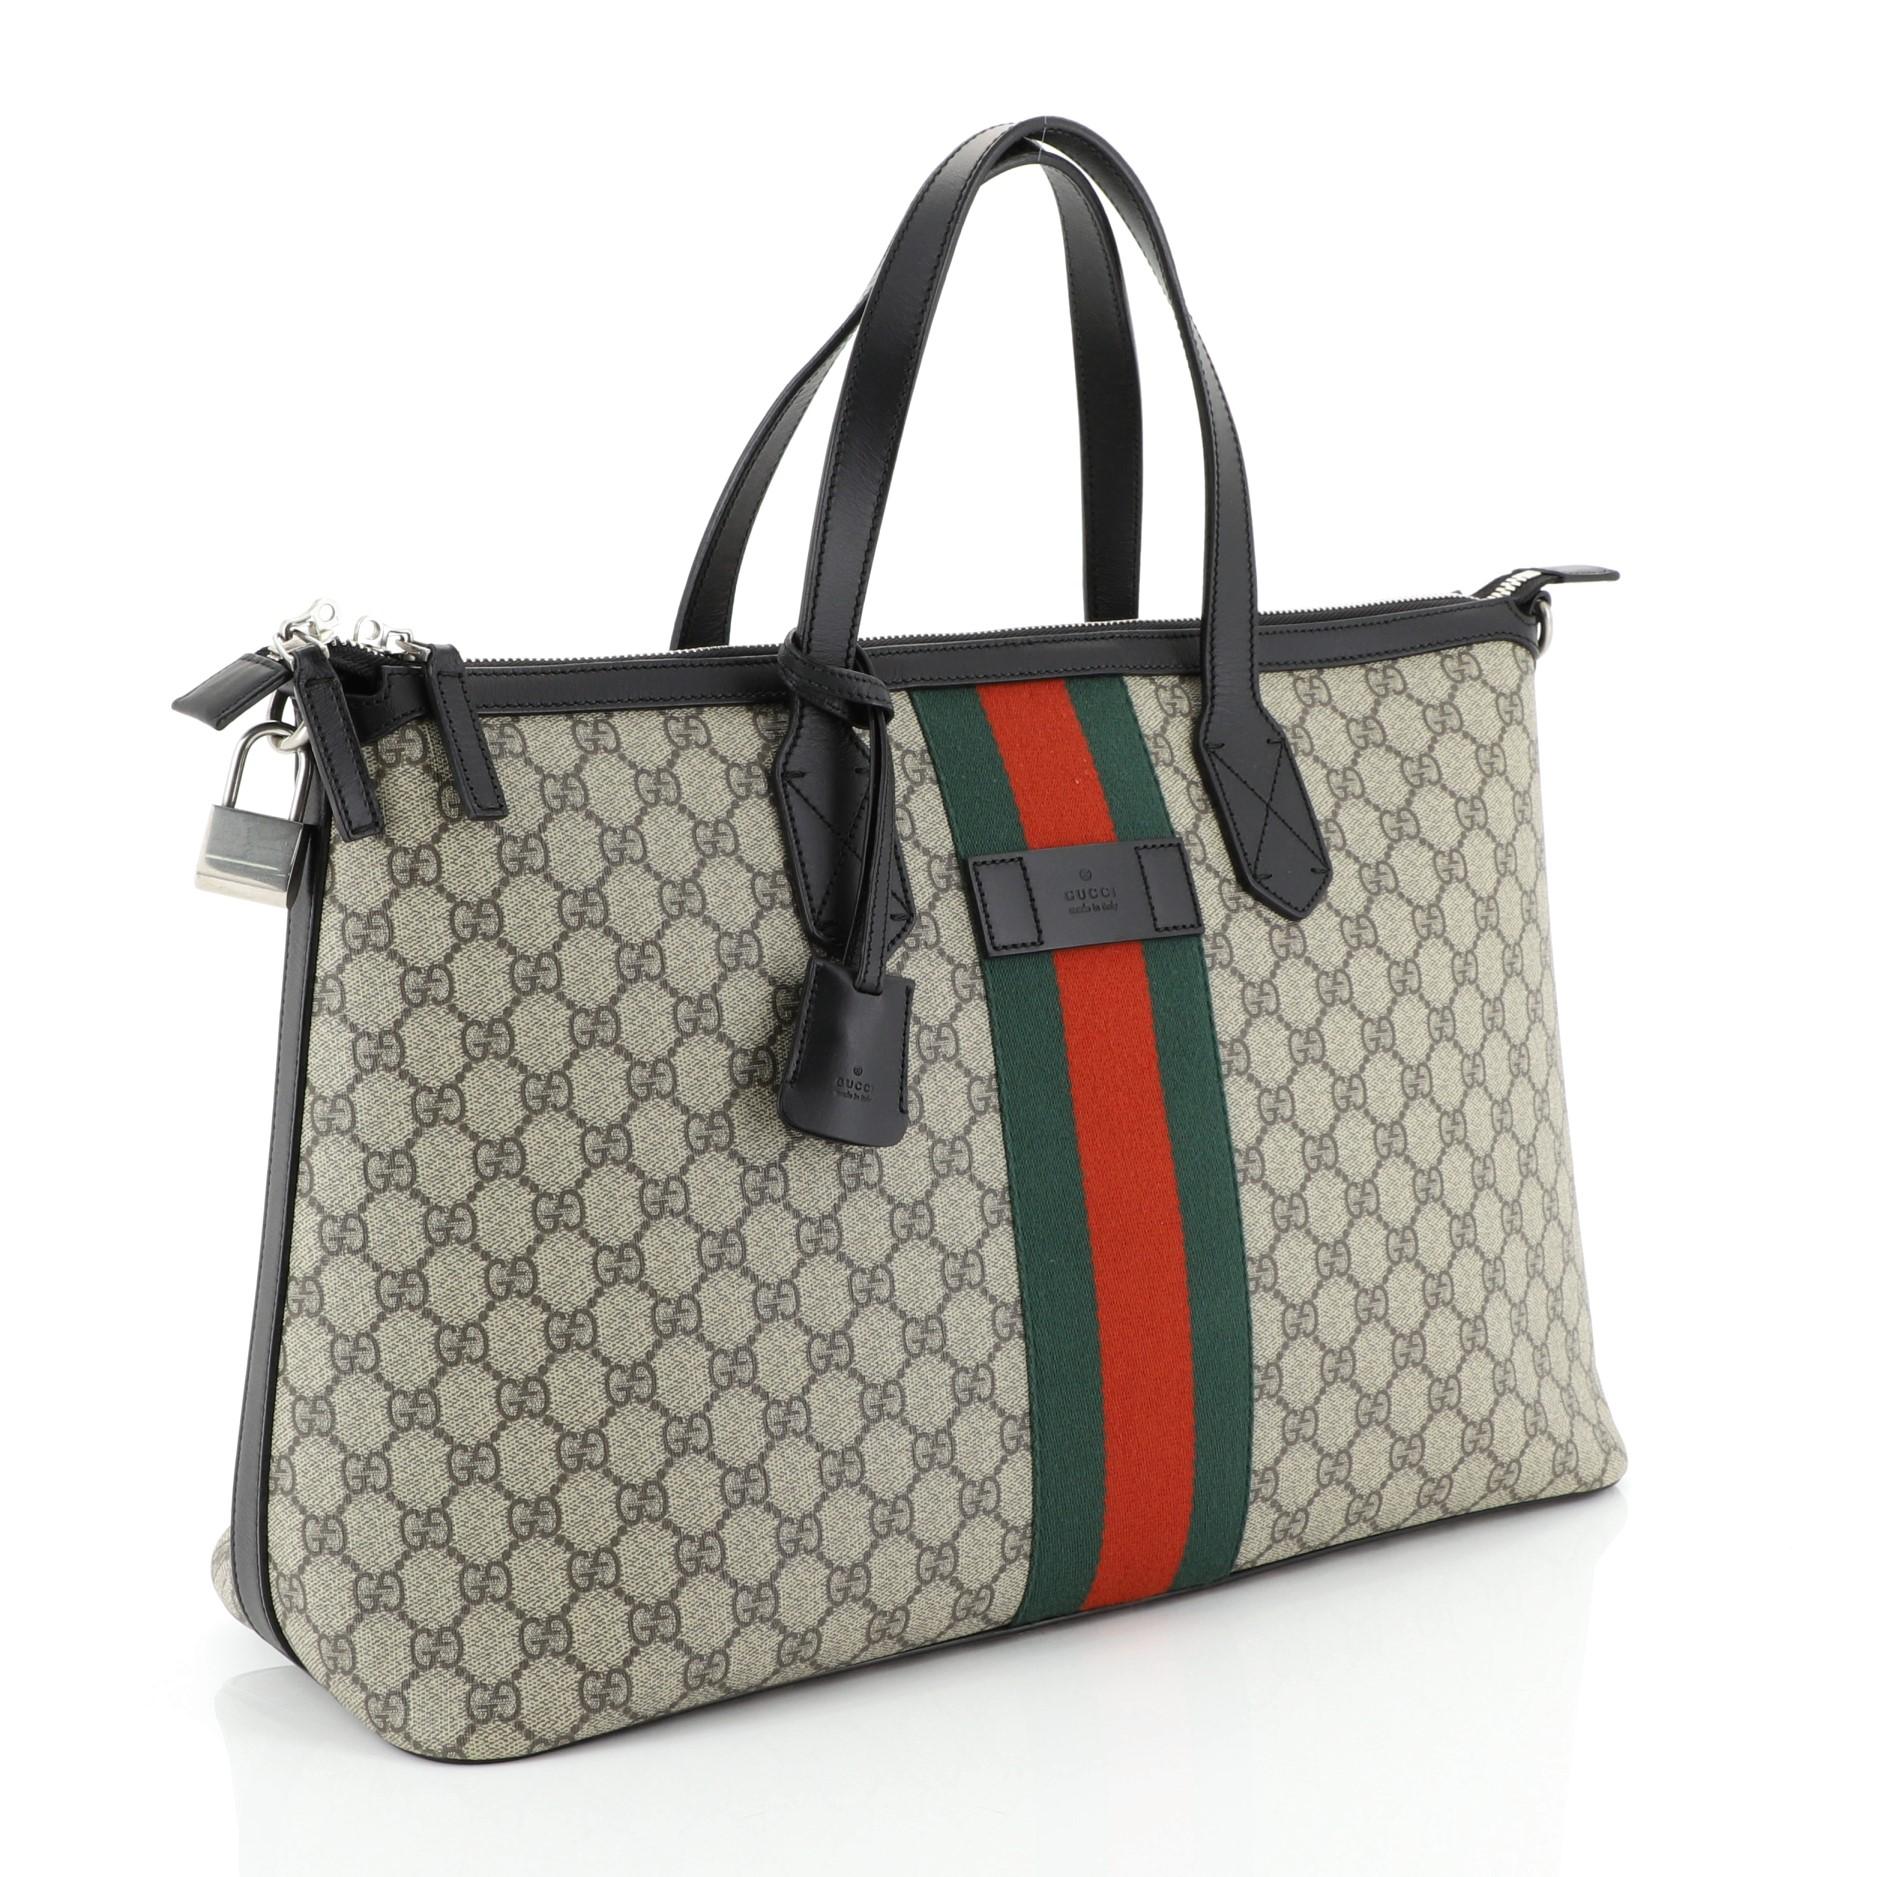 This Gucci Web Duffle Bag GG Coated Canvas Medium, crafted in brown GG coated canvas, features dual flat handles, web strap detailing, leather trim, and aged silver-tone hardware. Its zip closure opens to a black nylon interior with zip